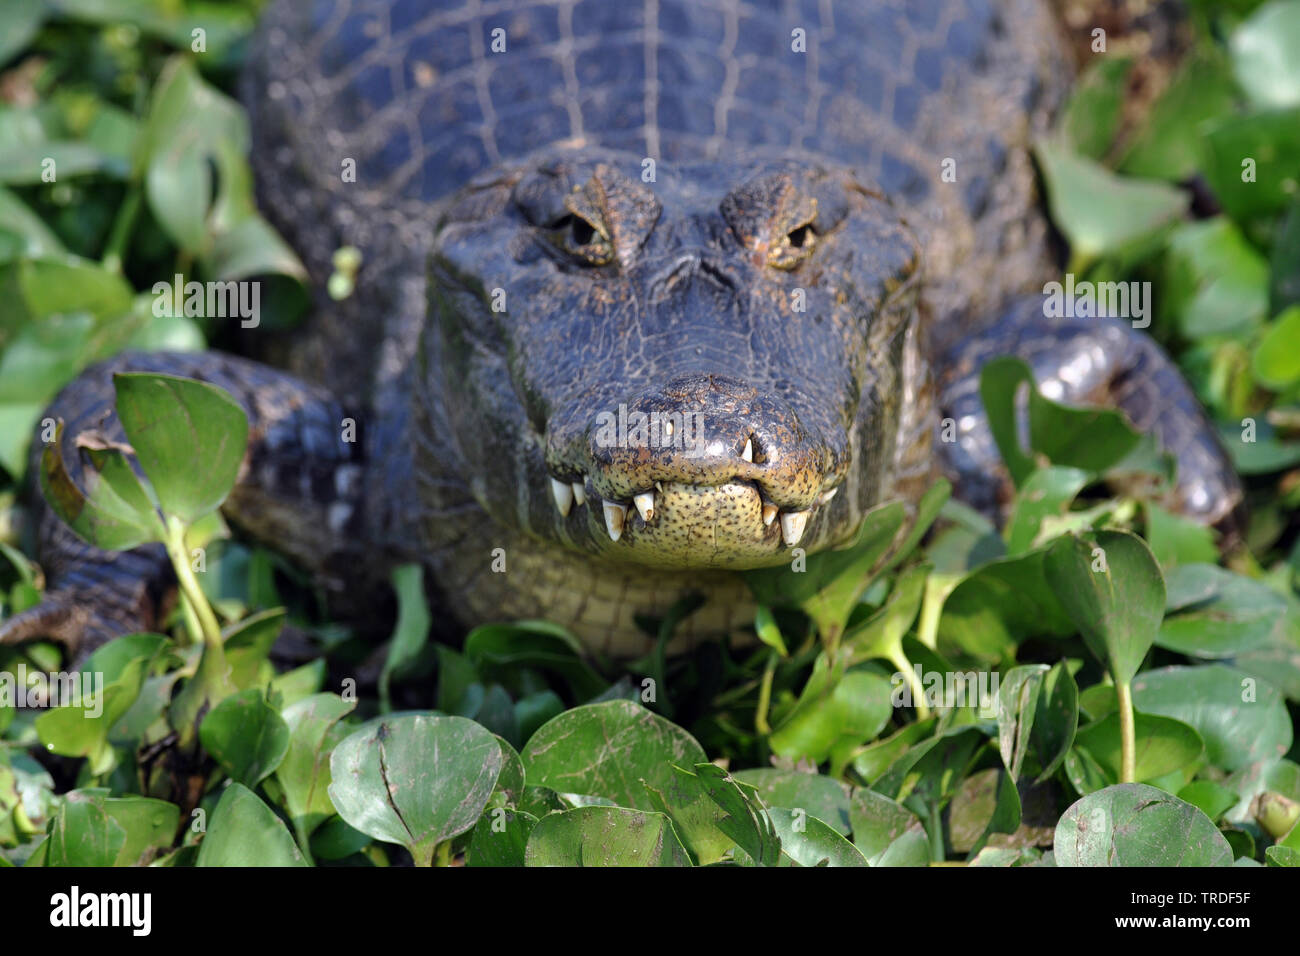 spectacled caiman (Caiman crocodilus), by the waterside, Brazil, Pantanal Stock Photo